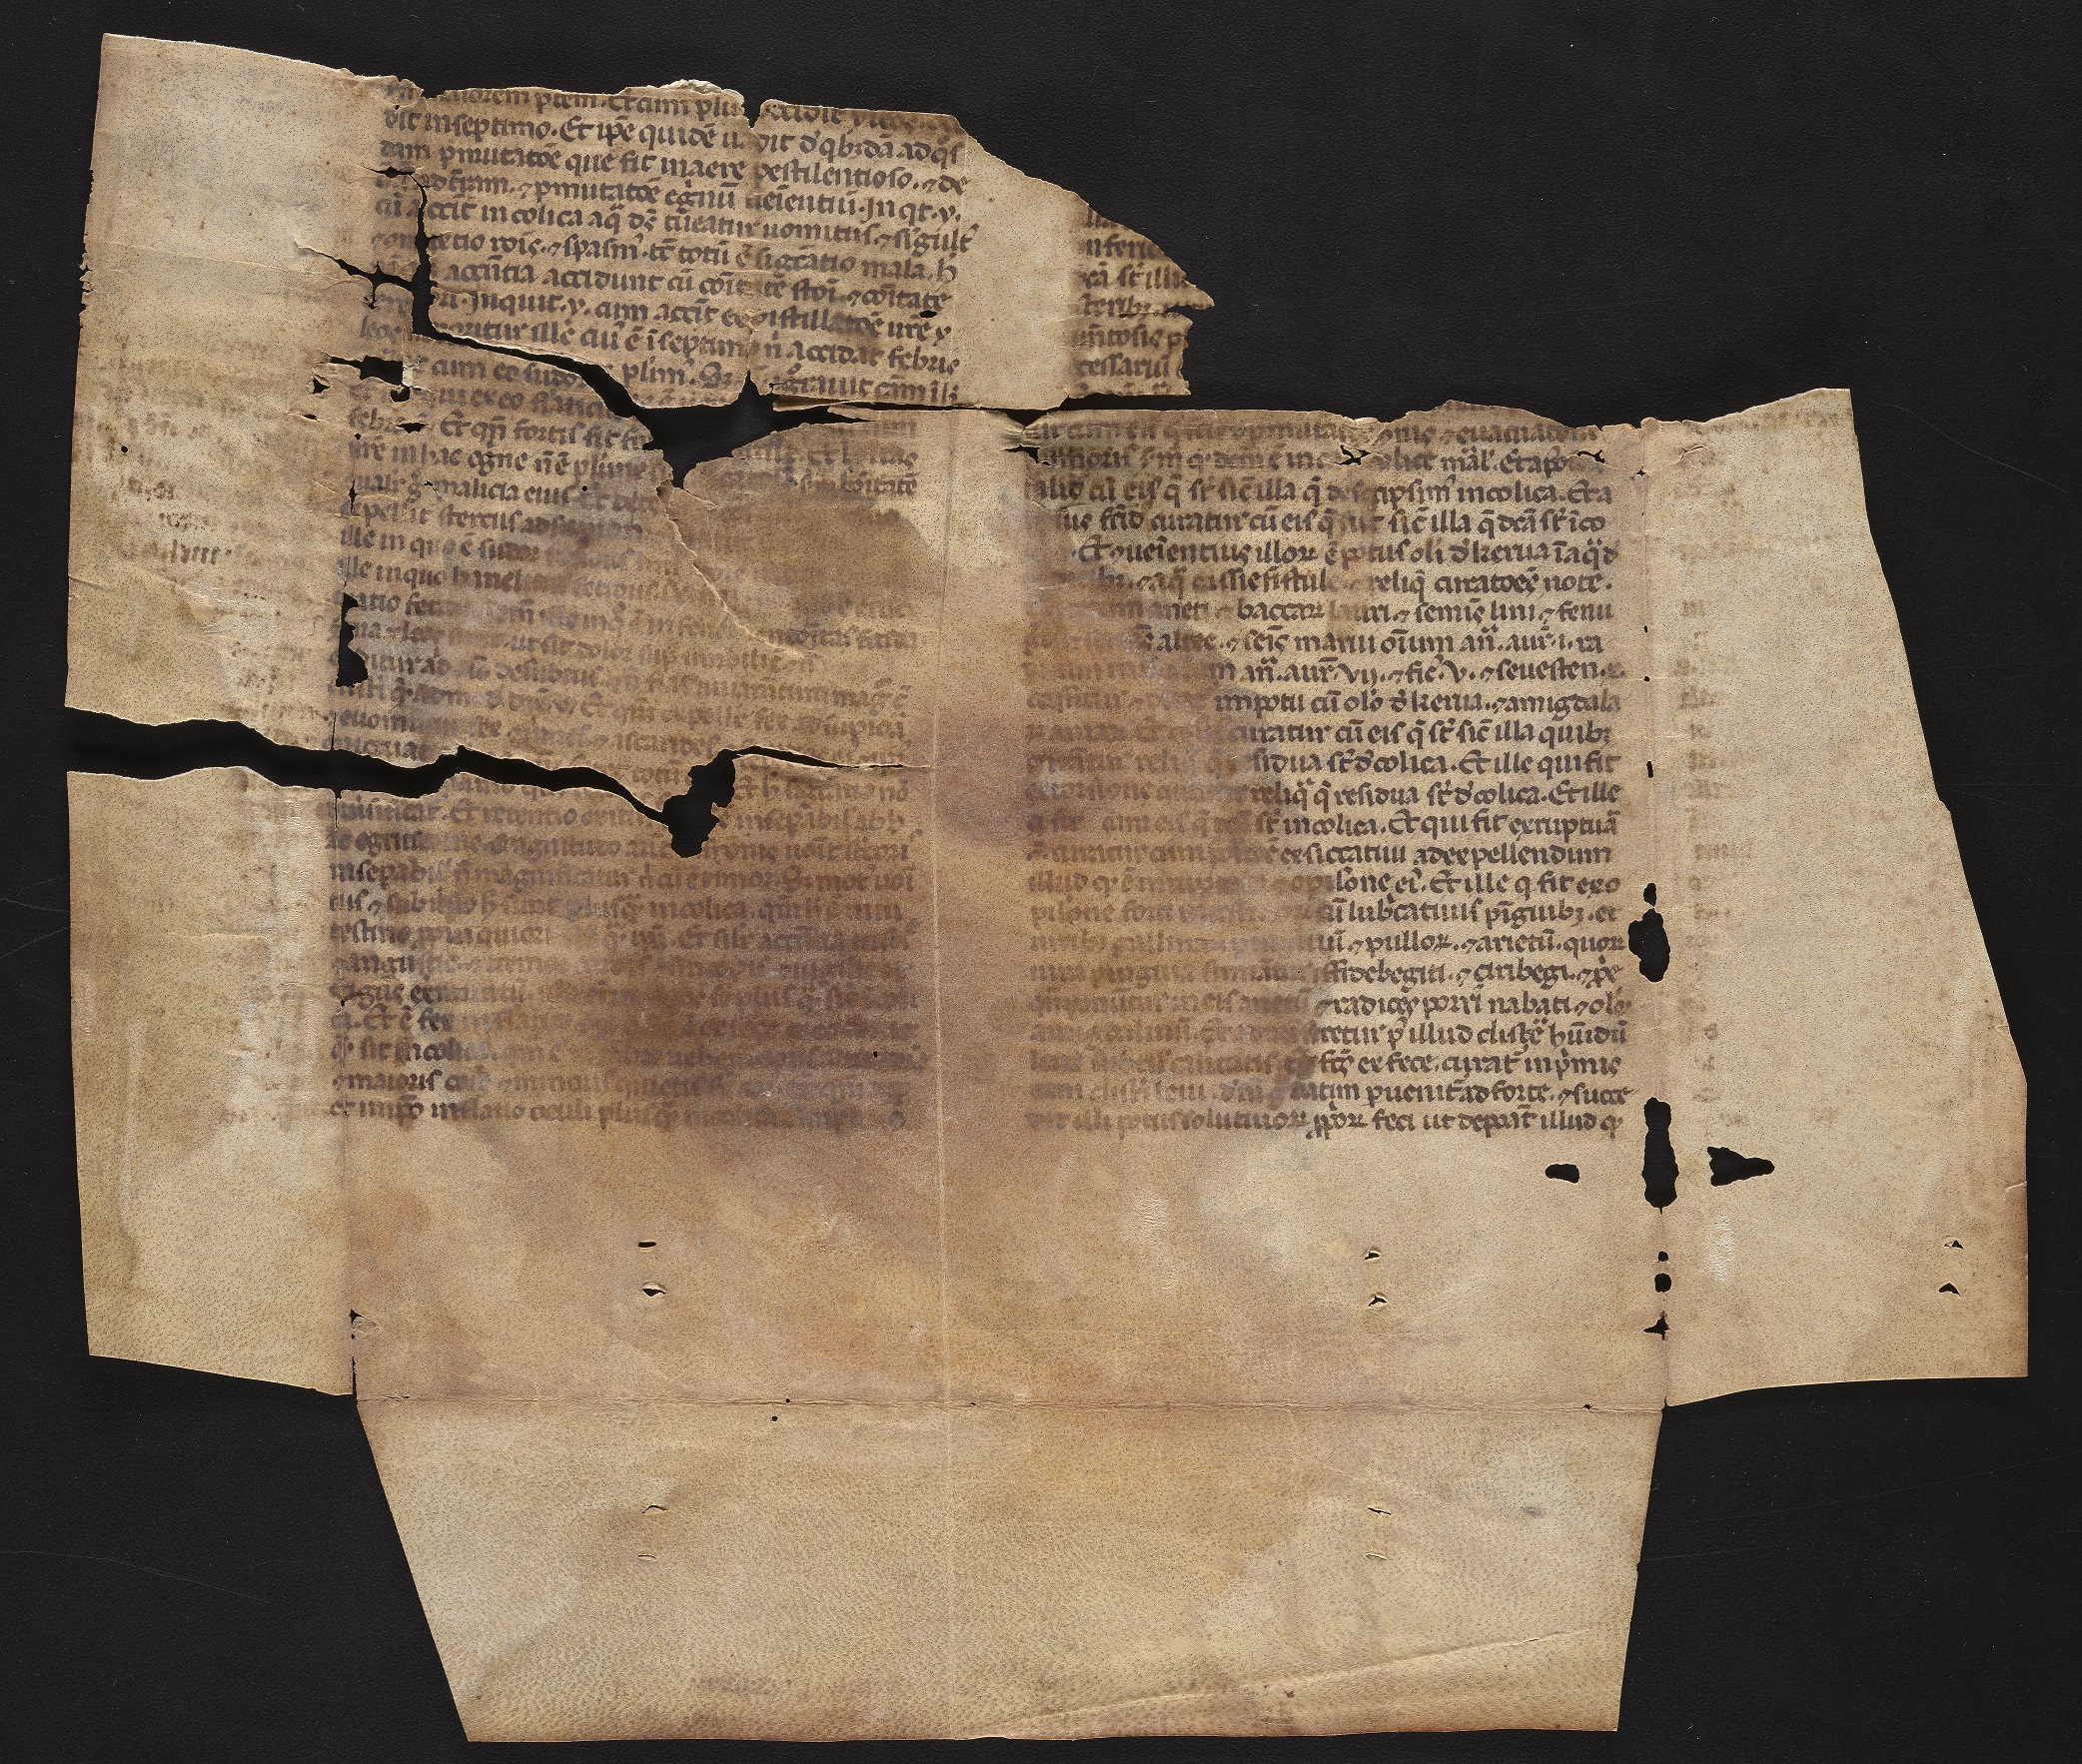 Manuscript fragment showing folds from being in a bookbinding and other damage from loss of the parchment.